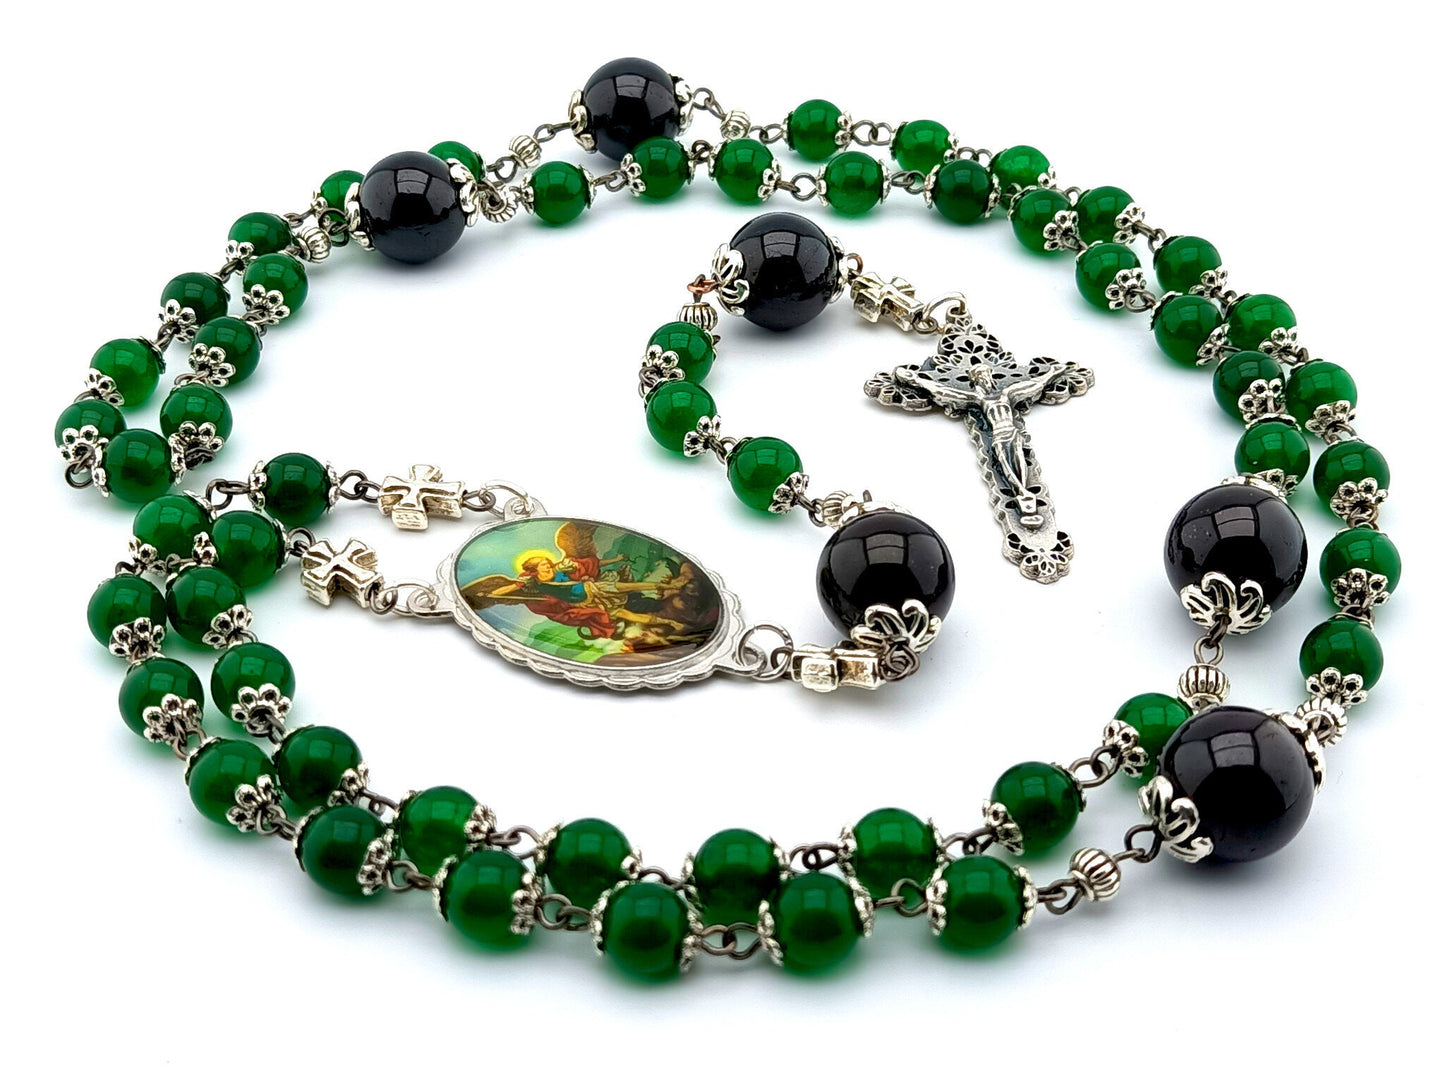 Saint Michael unique rosary beads with green jasper and onyx gemstone beads, silver filigree crucifix and picture centre medal.